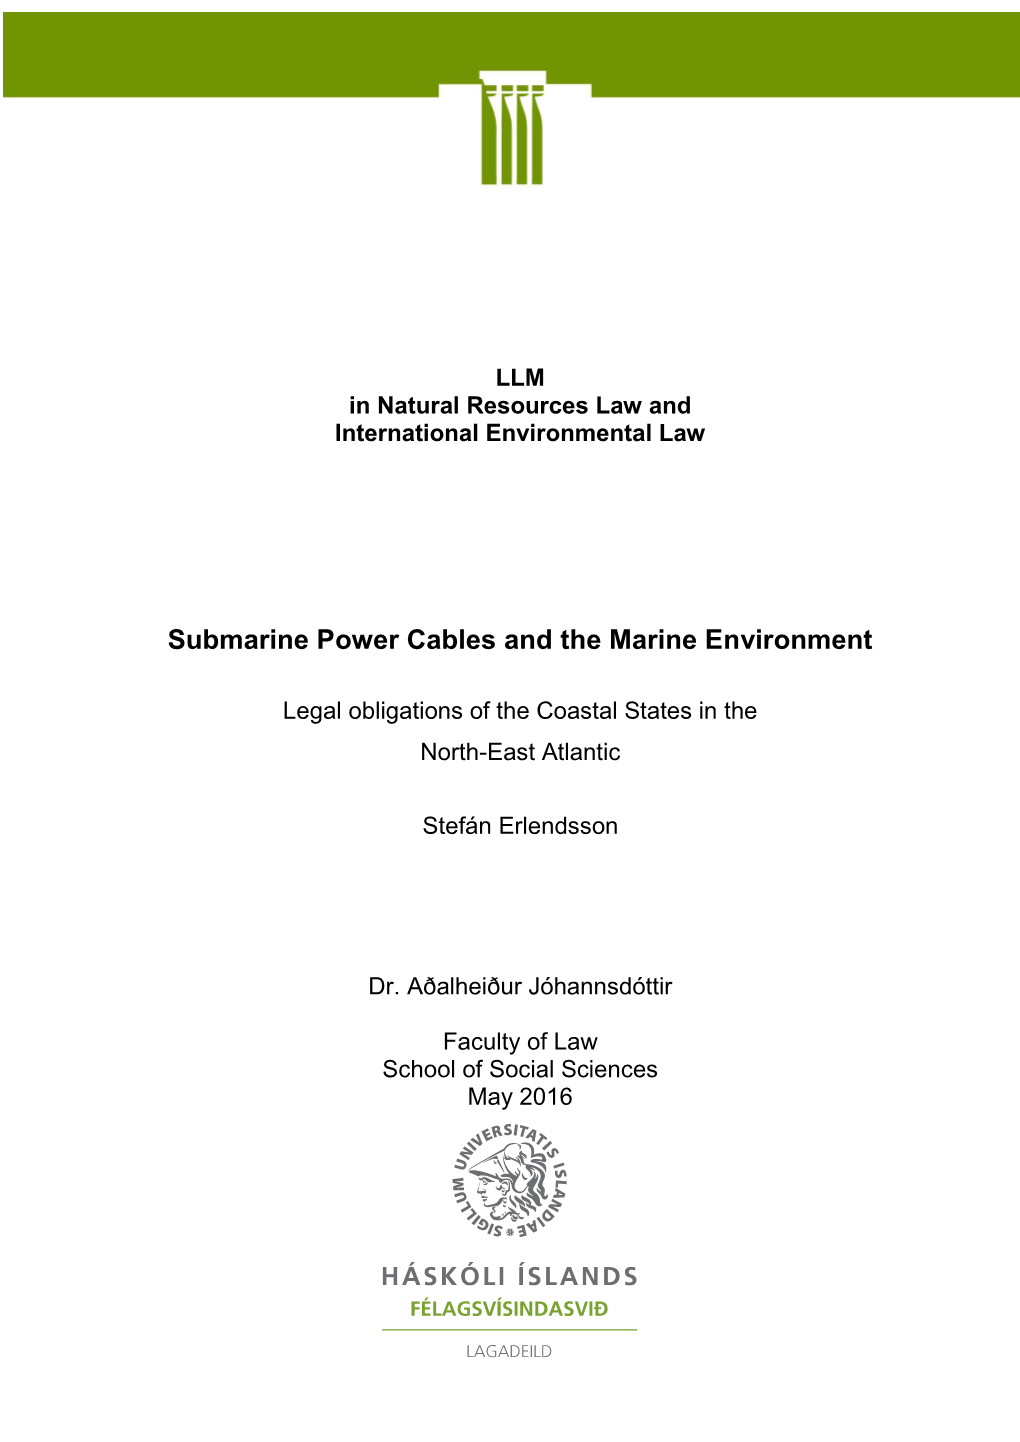 Submarine Power Cables and the Marine Environment